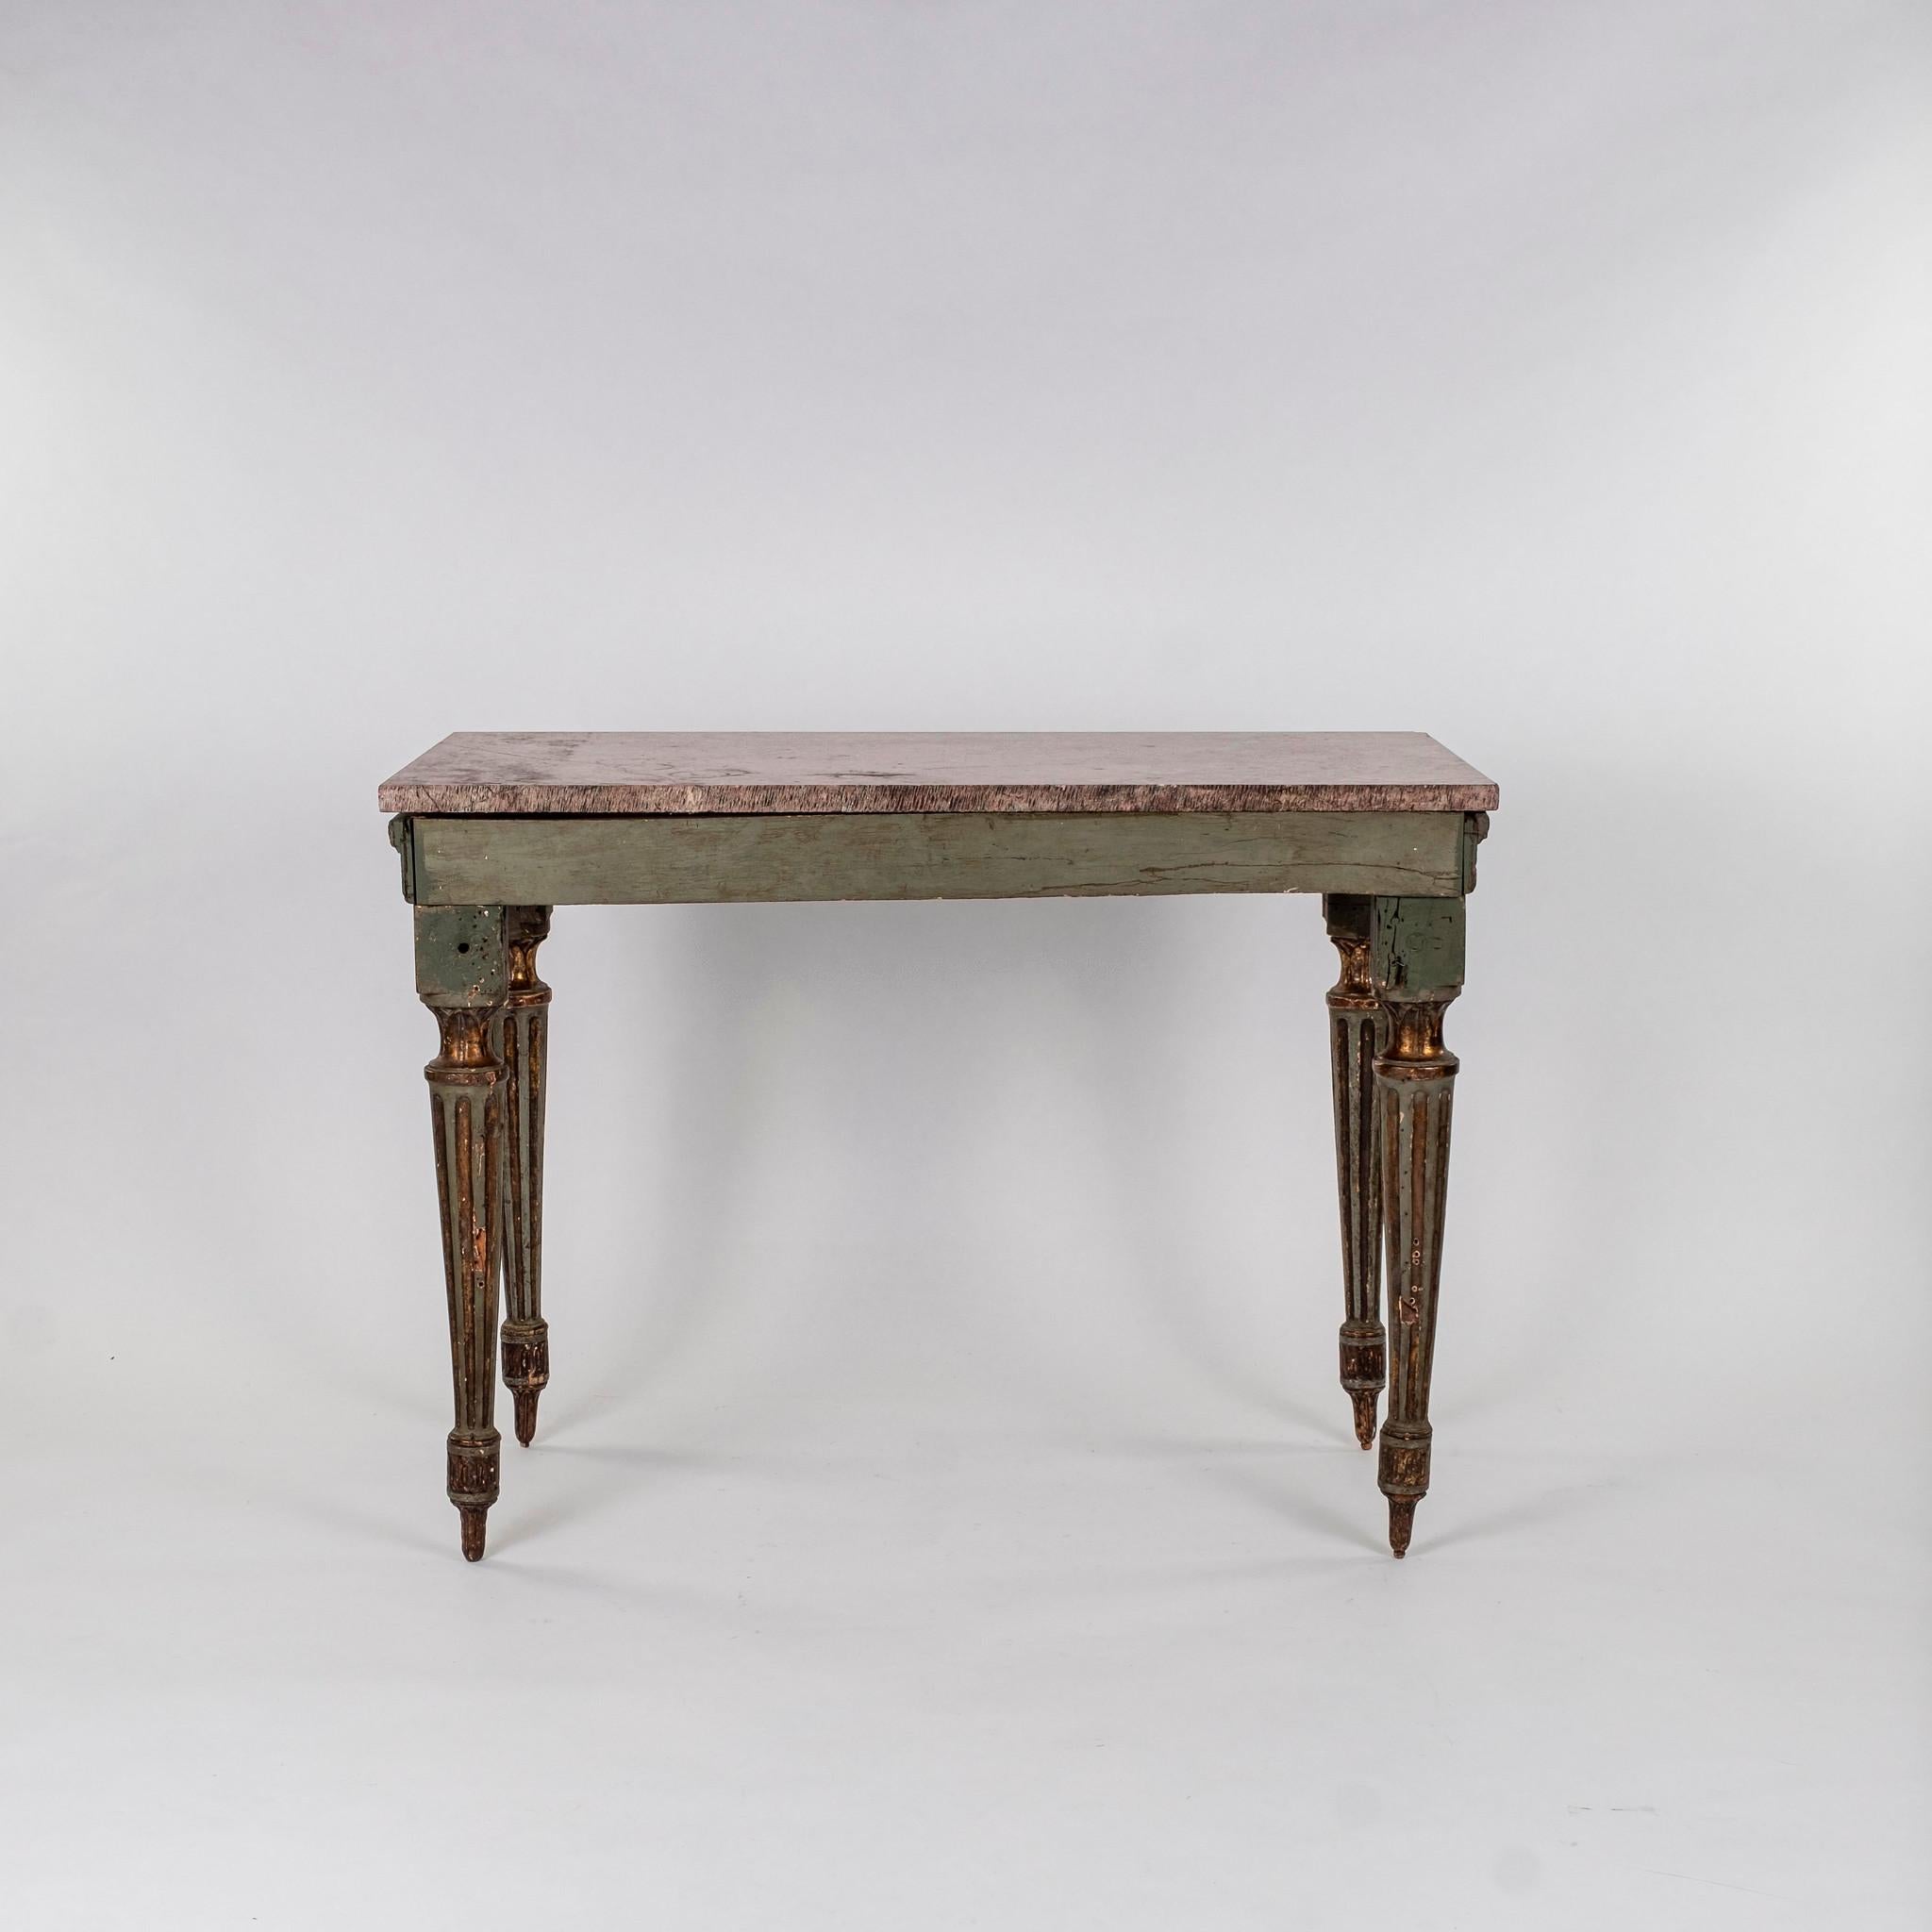 Period 18th century Italian Louis XVI console table with rouge marble top. Console is raised by fluted tapered legs and decorated with ribbons and rosettes.